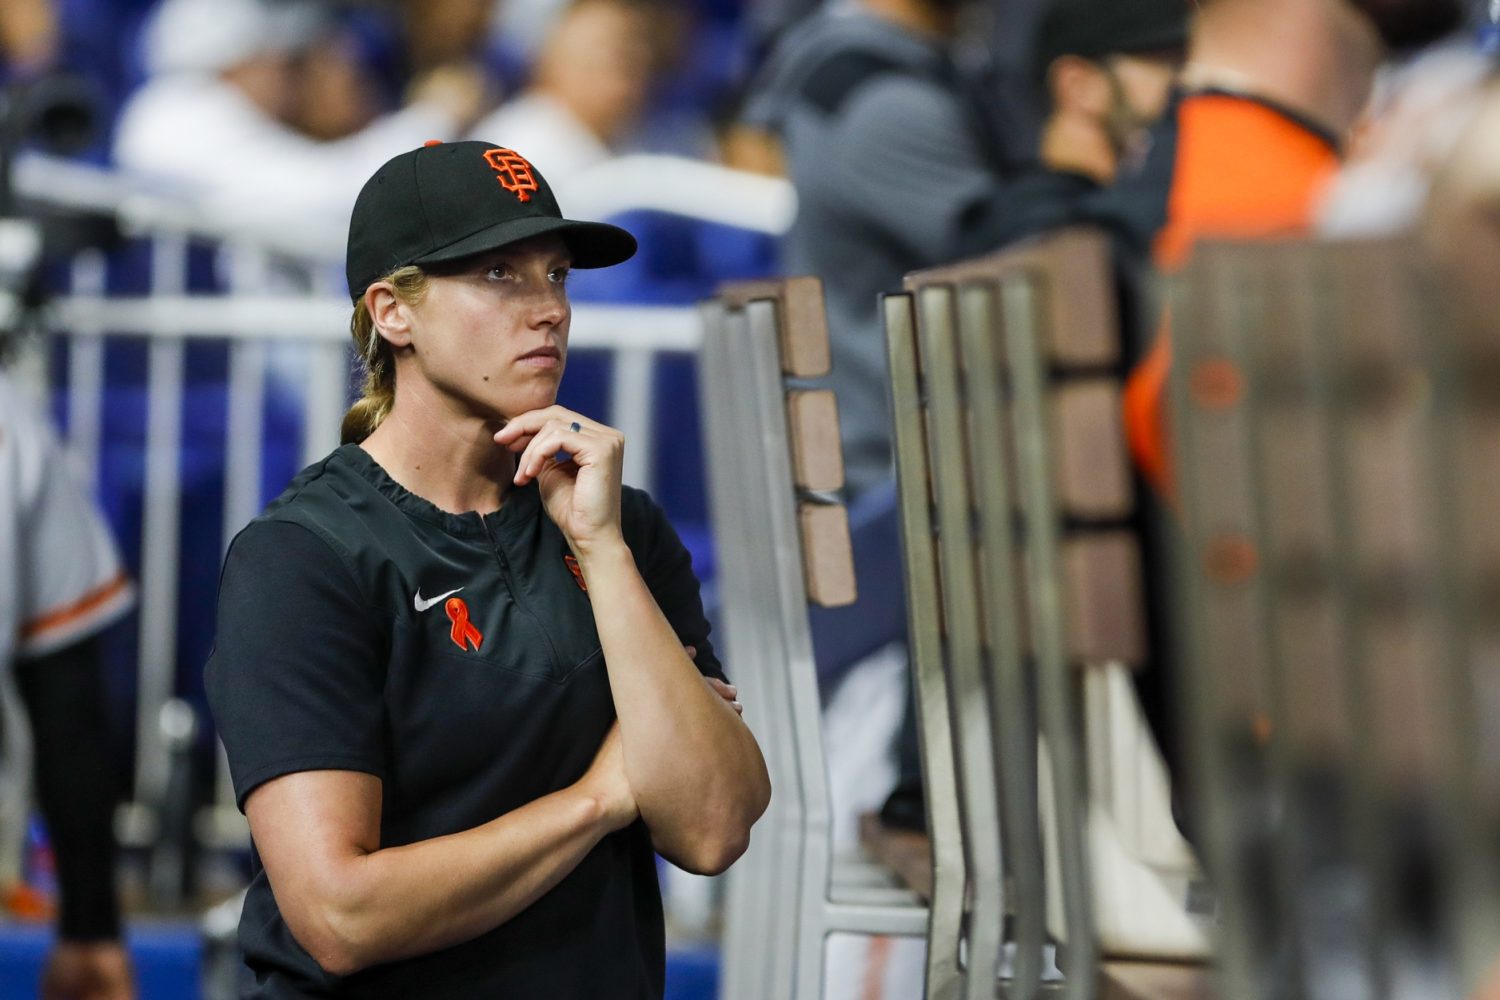 San Francisco Giants assistant coach Alyssa Nakken (92) watches from the dugout prior to the game against the Miami Marlins at loanDepot Park.